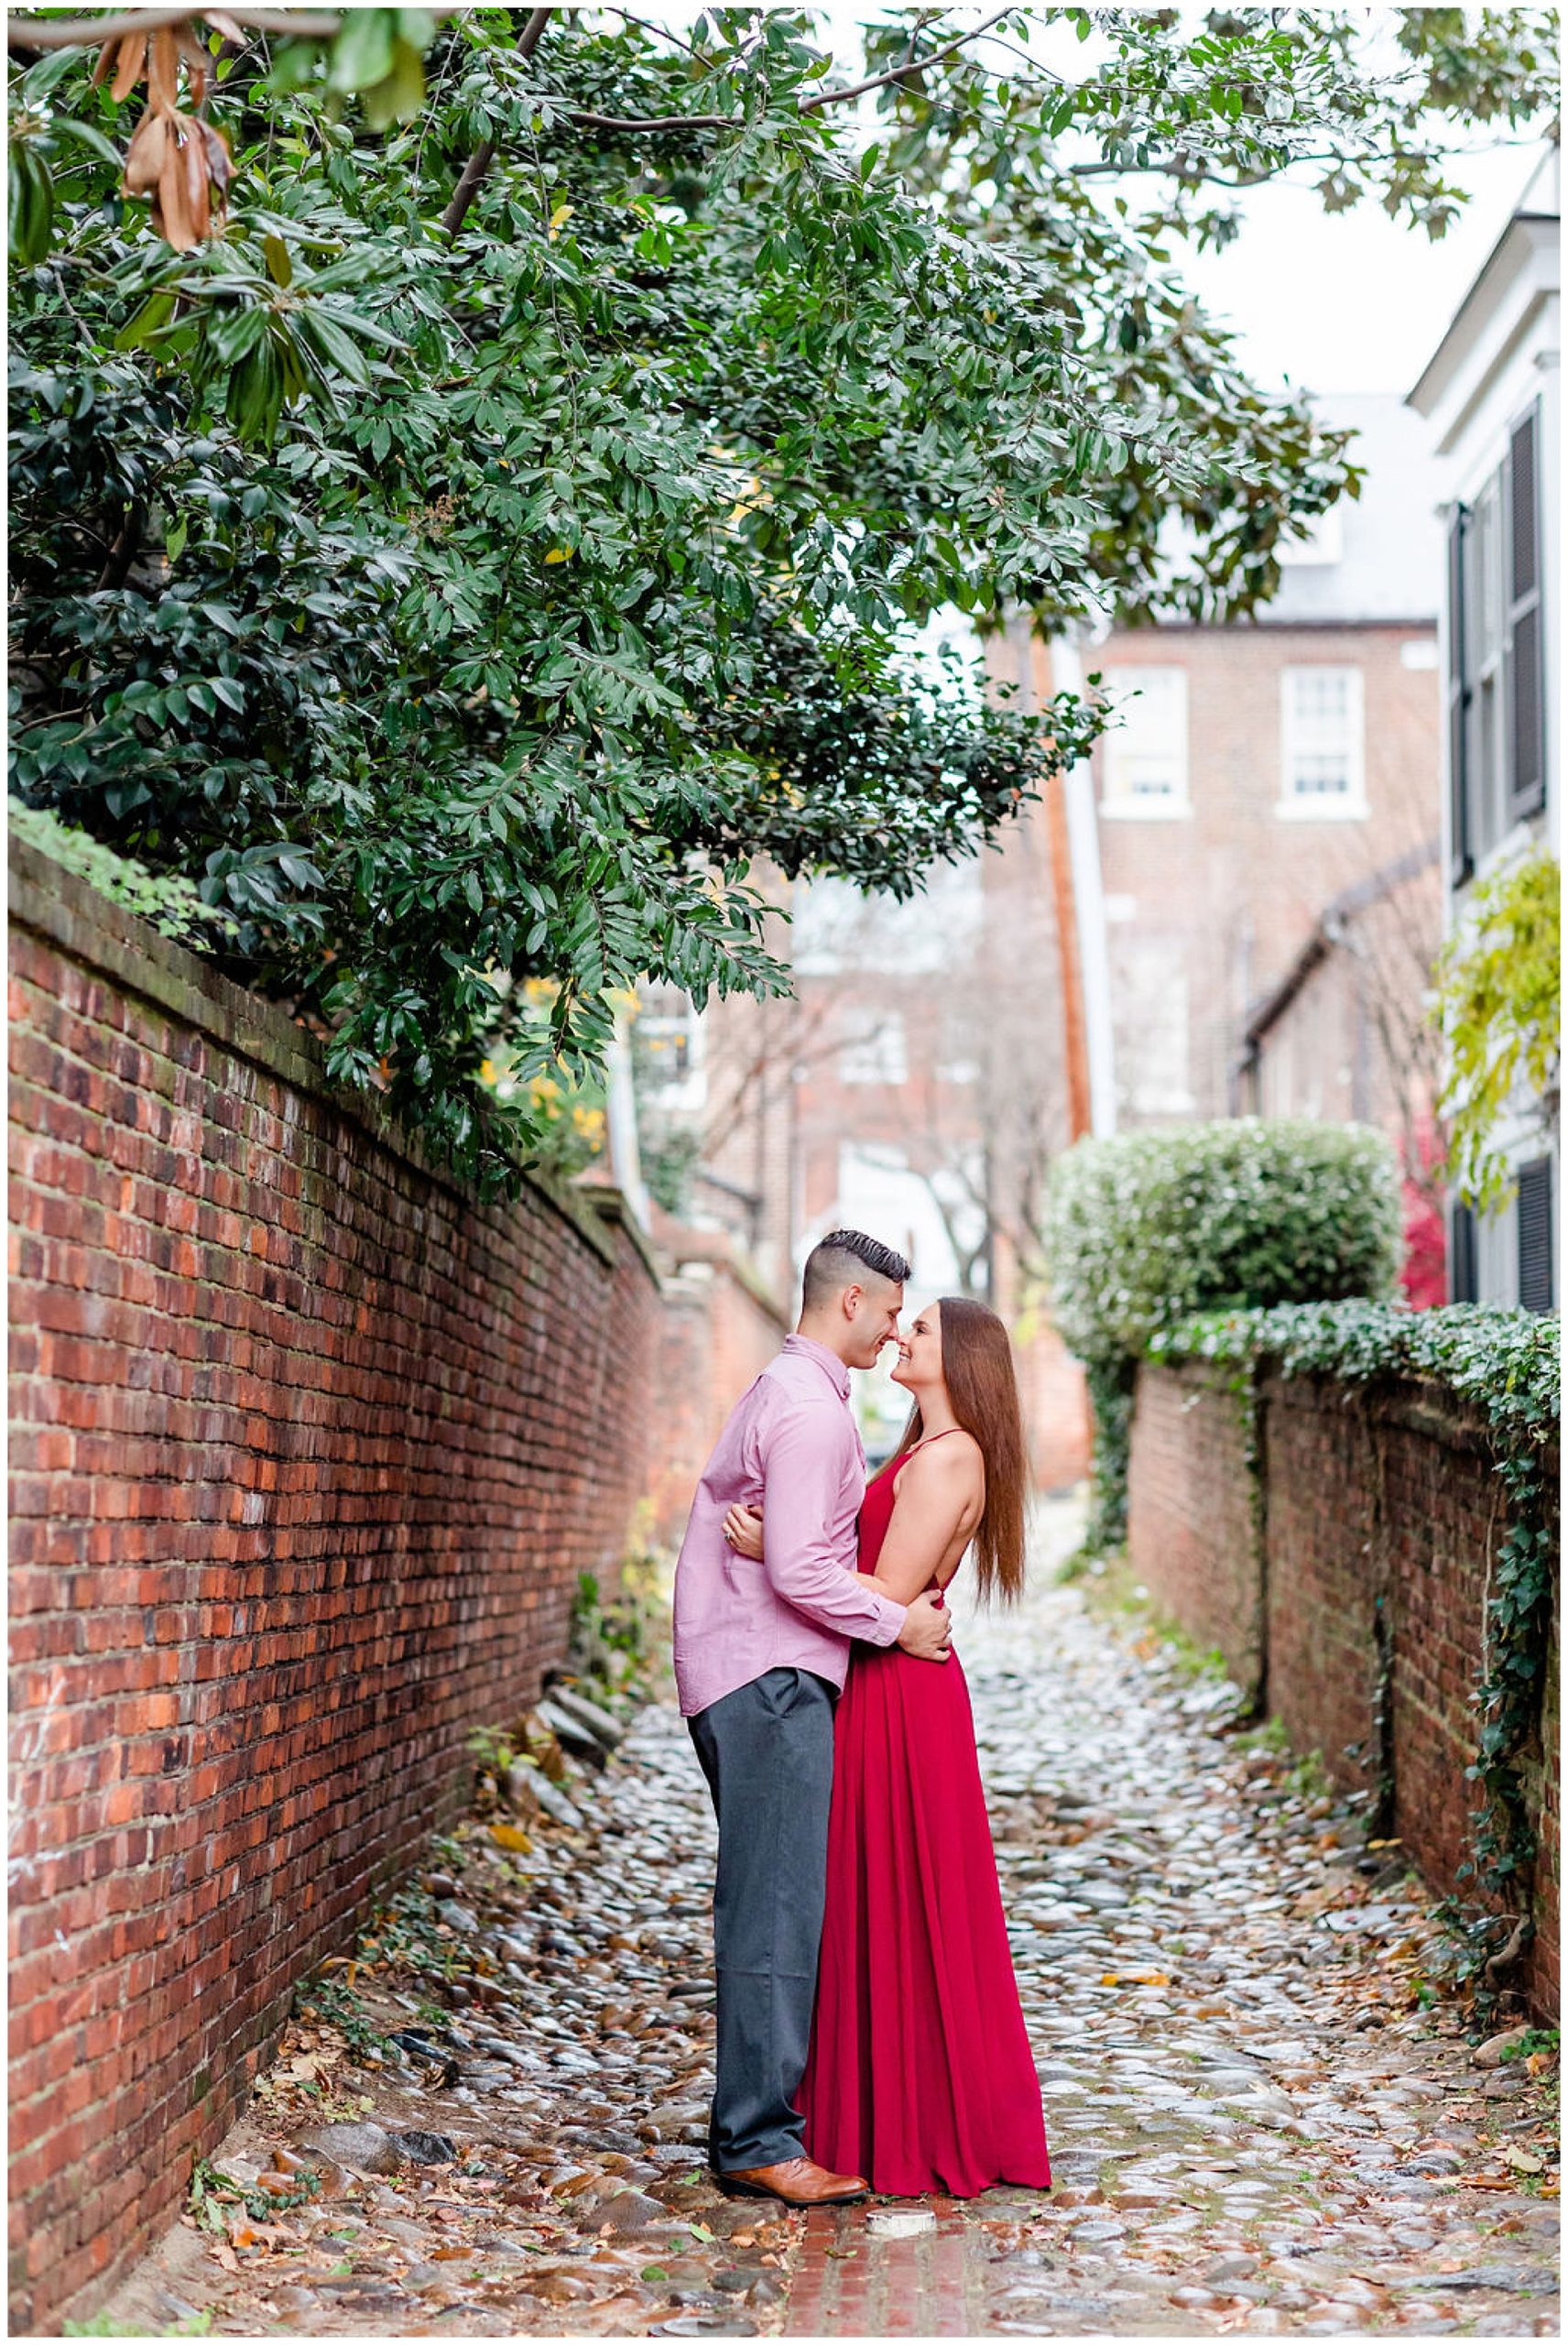 winter Alexandria engagement session, Alexandria engagement photos, Alexandria Virginia portraits, Old Town Alexandria engagement photos, winter engagement photos, Christmas engagement photos, semi-formal engagement photos, Rachel E.H. Photography, couple almost kissing, couple in alleyway